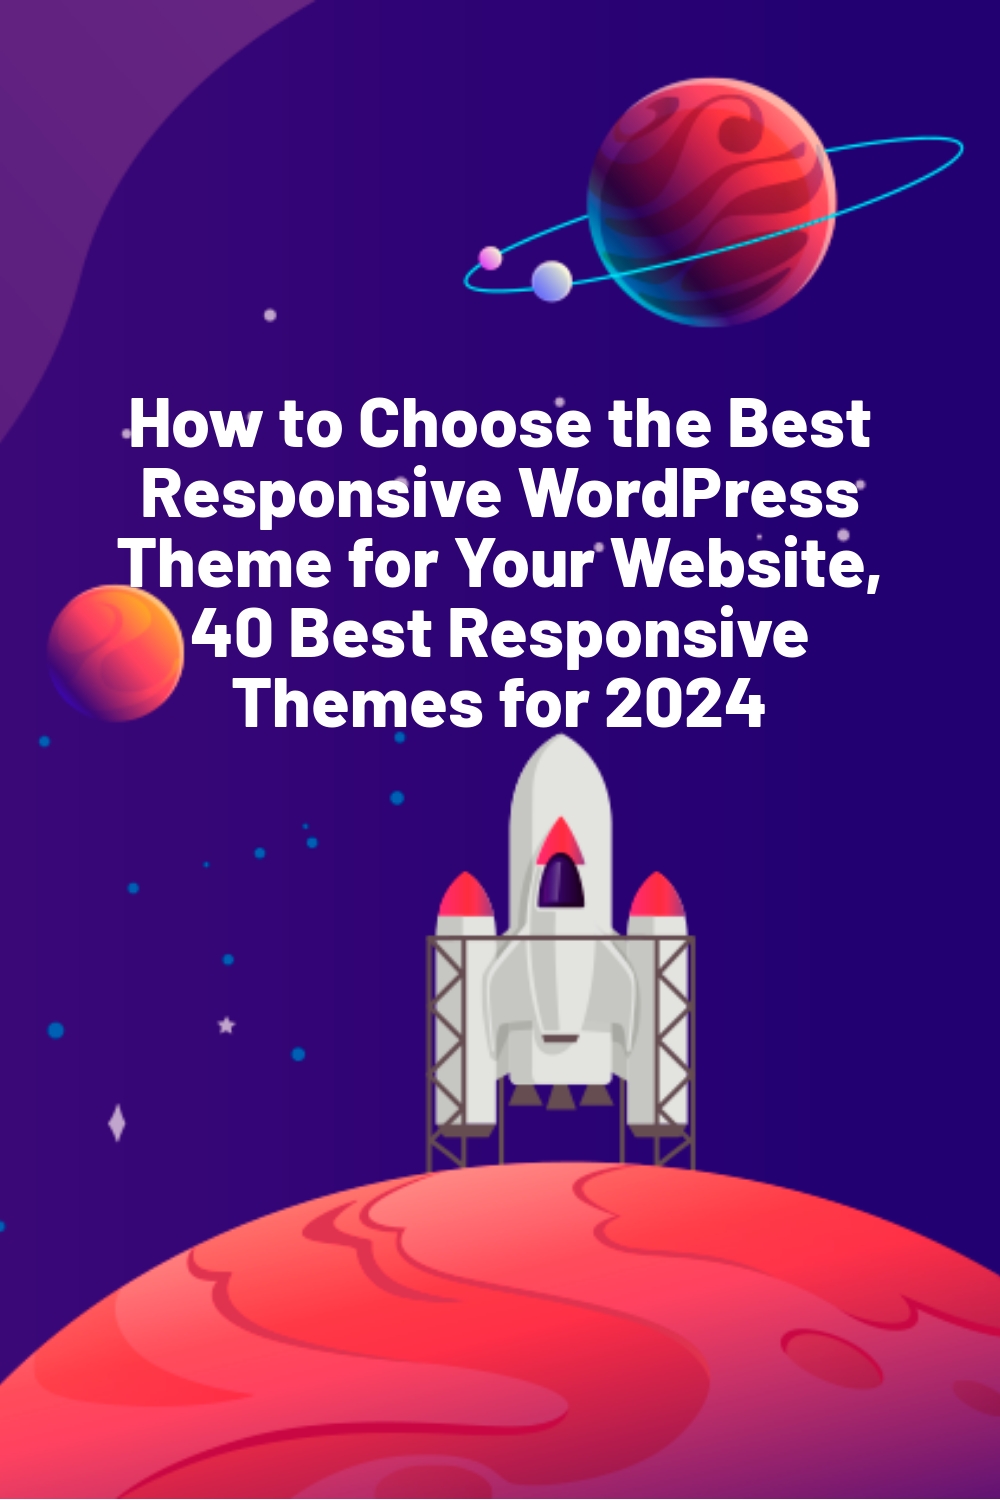 How to Choose the Best Responsive WordPress Theme for Your Website, 40 Best Responsive Themes for 2024